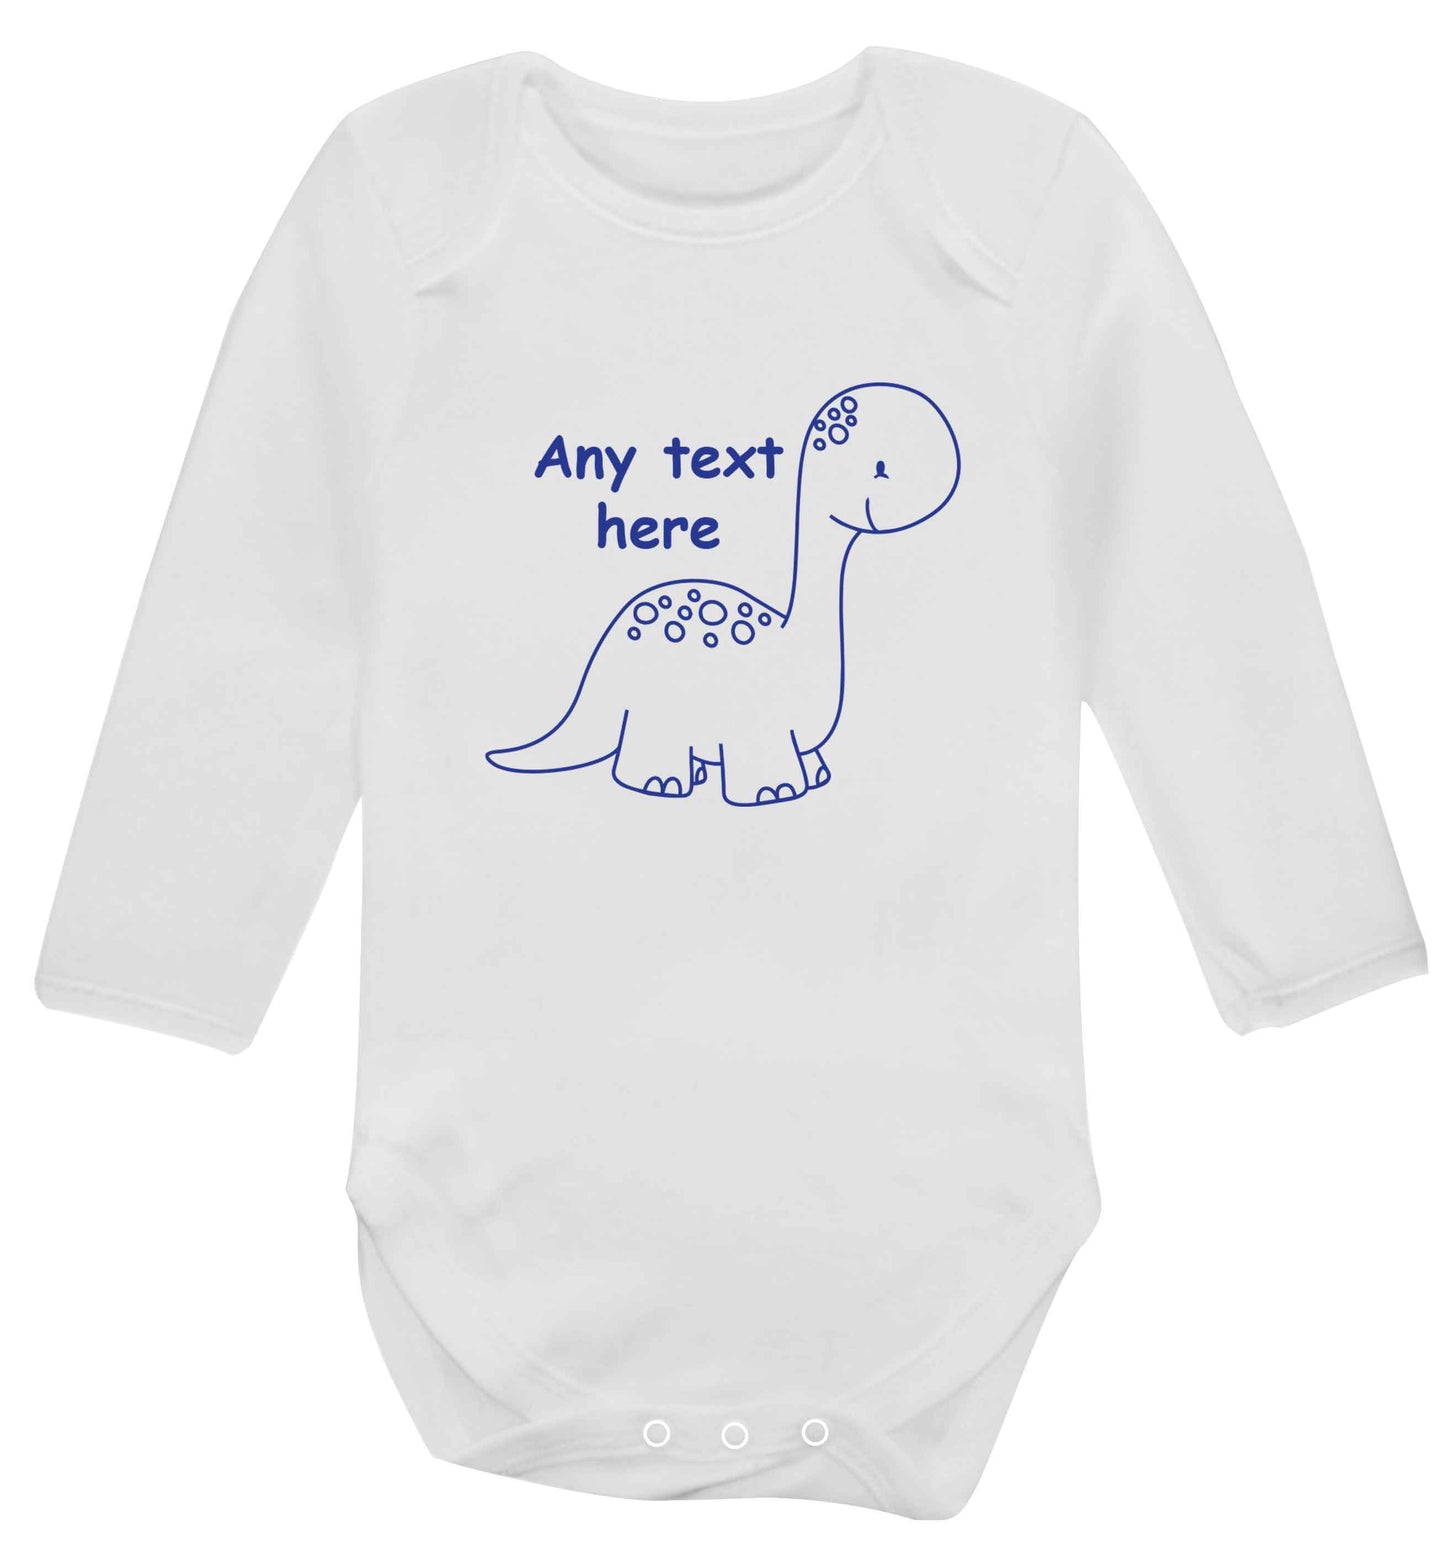 Dinosaur any text baby vest long sleeved white 6-12 months